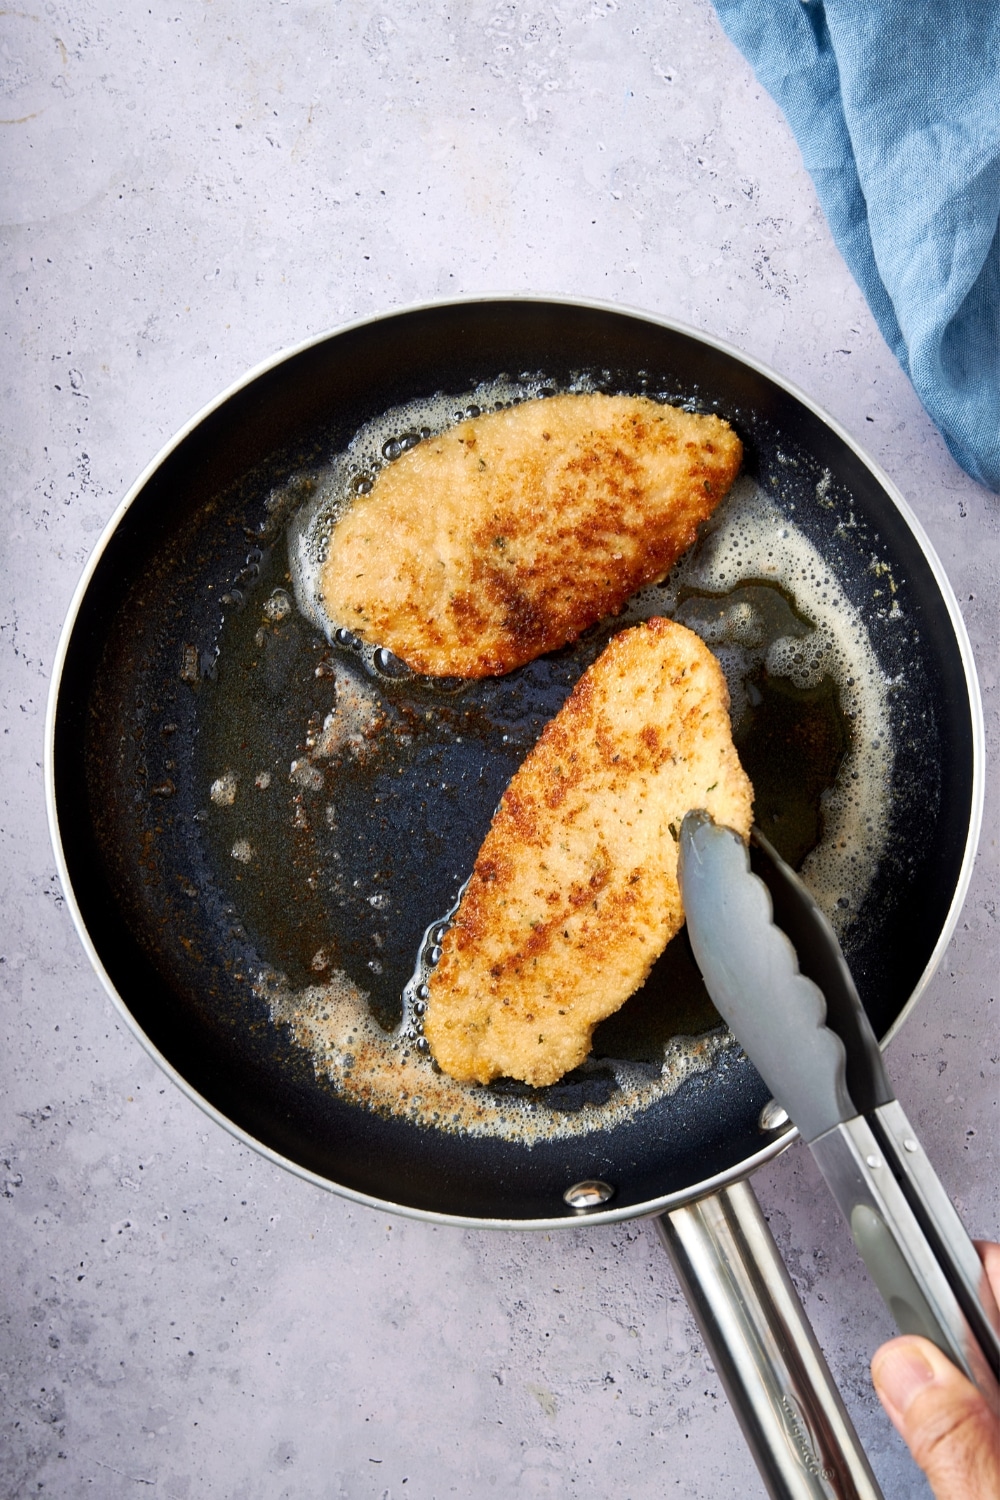 Taking cooked turkey cutlets out of the skillet with tongs.